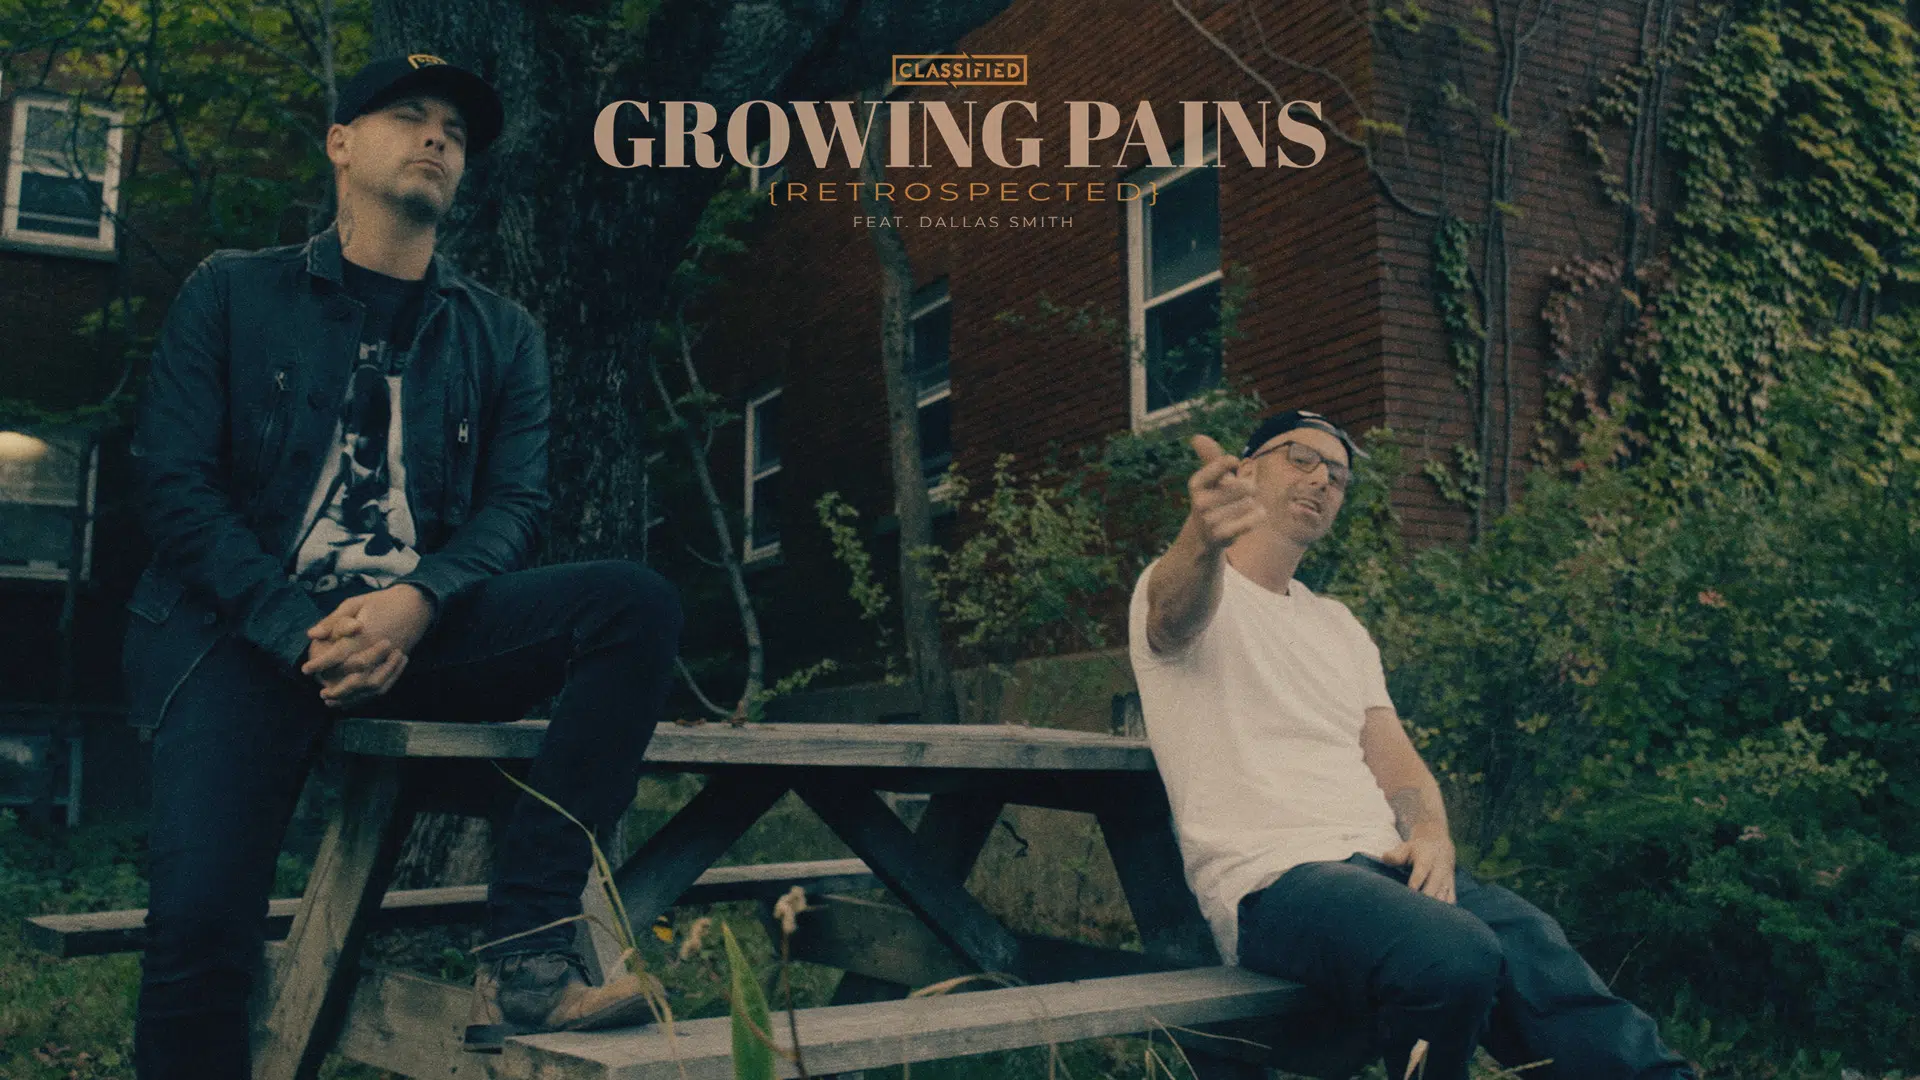 Classified Featuring Dallas Smith - 'Growing Pains' (Retrospected)  - NEW VIDEO